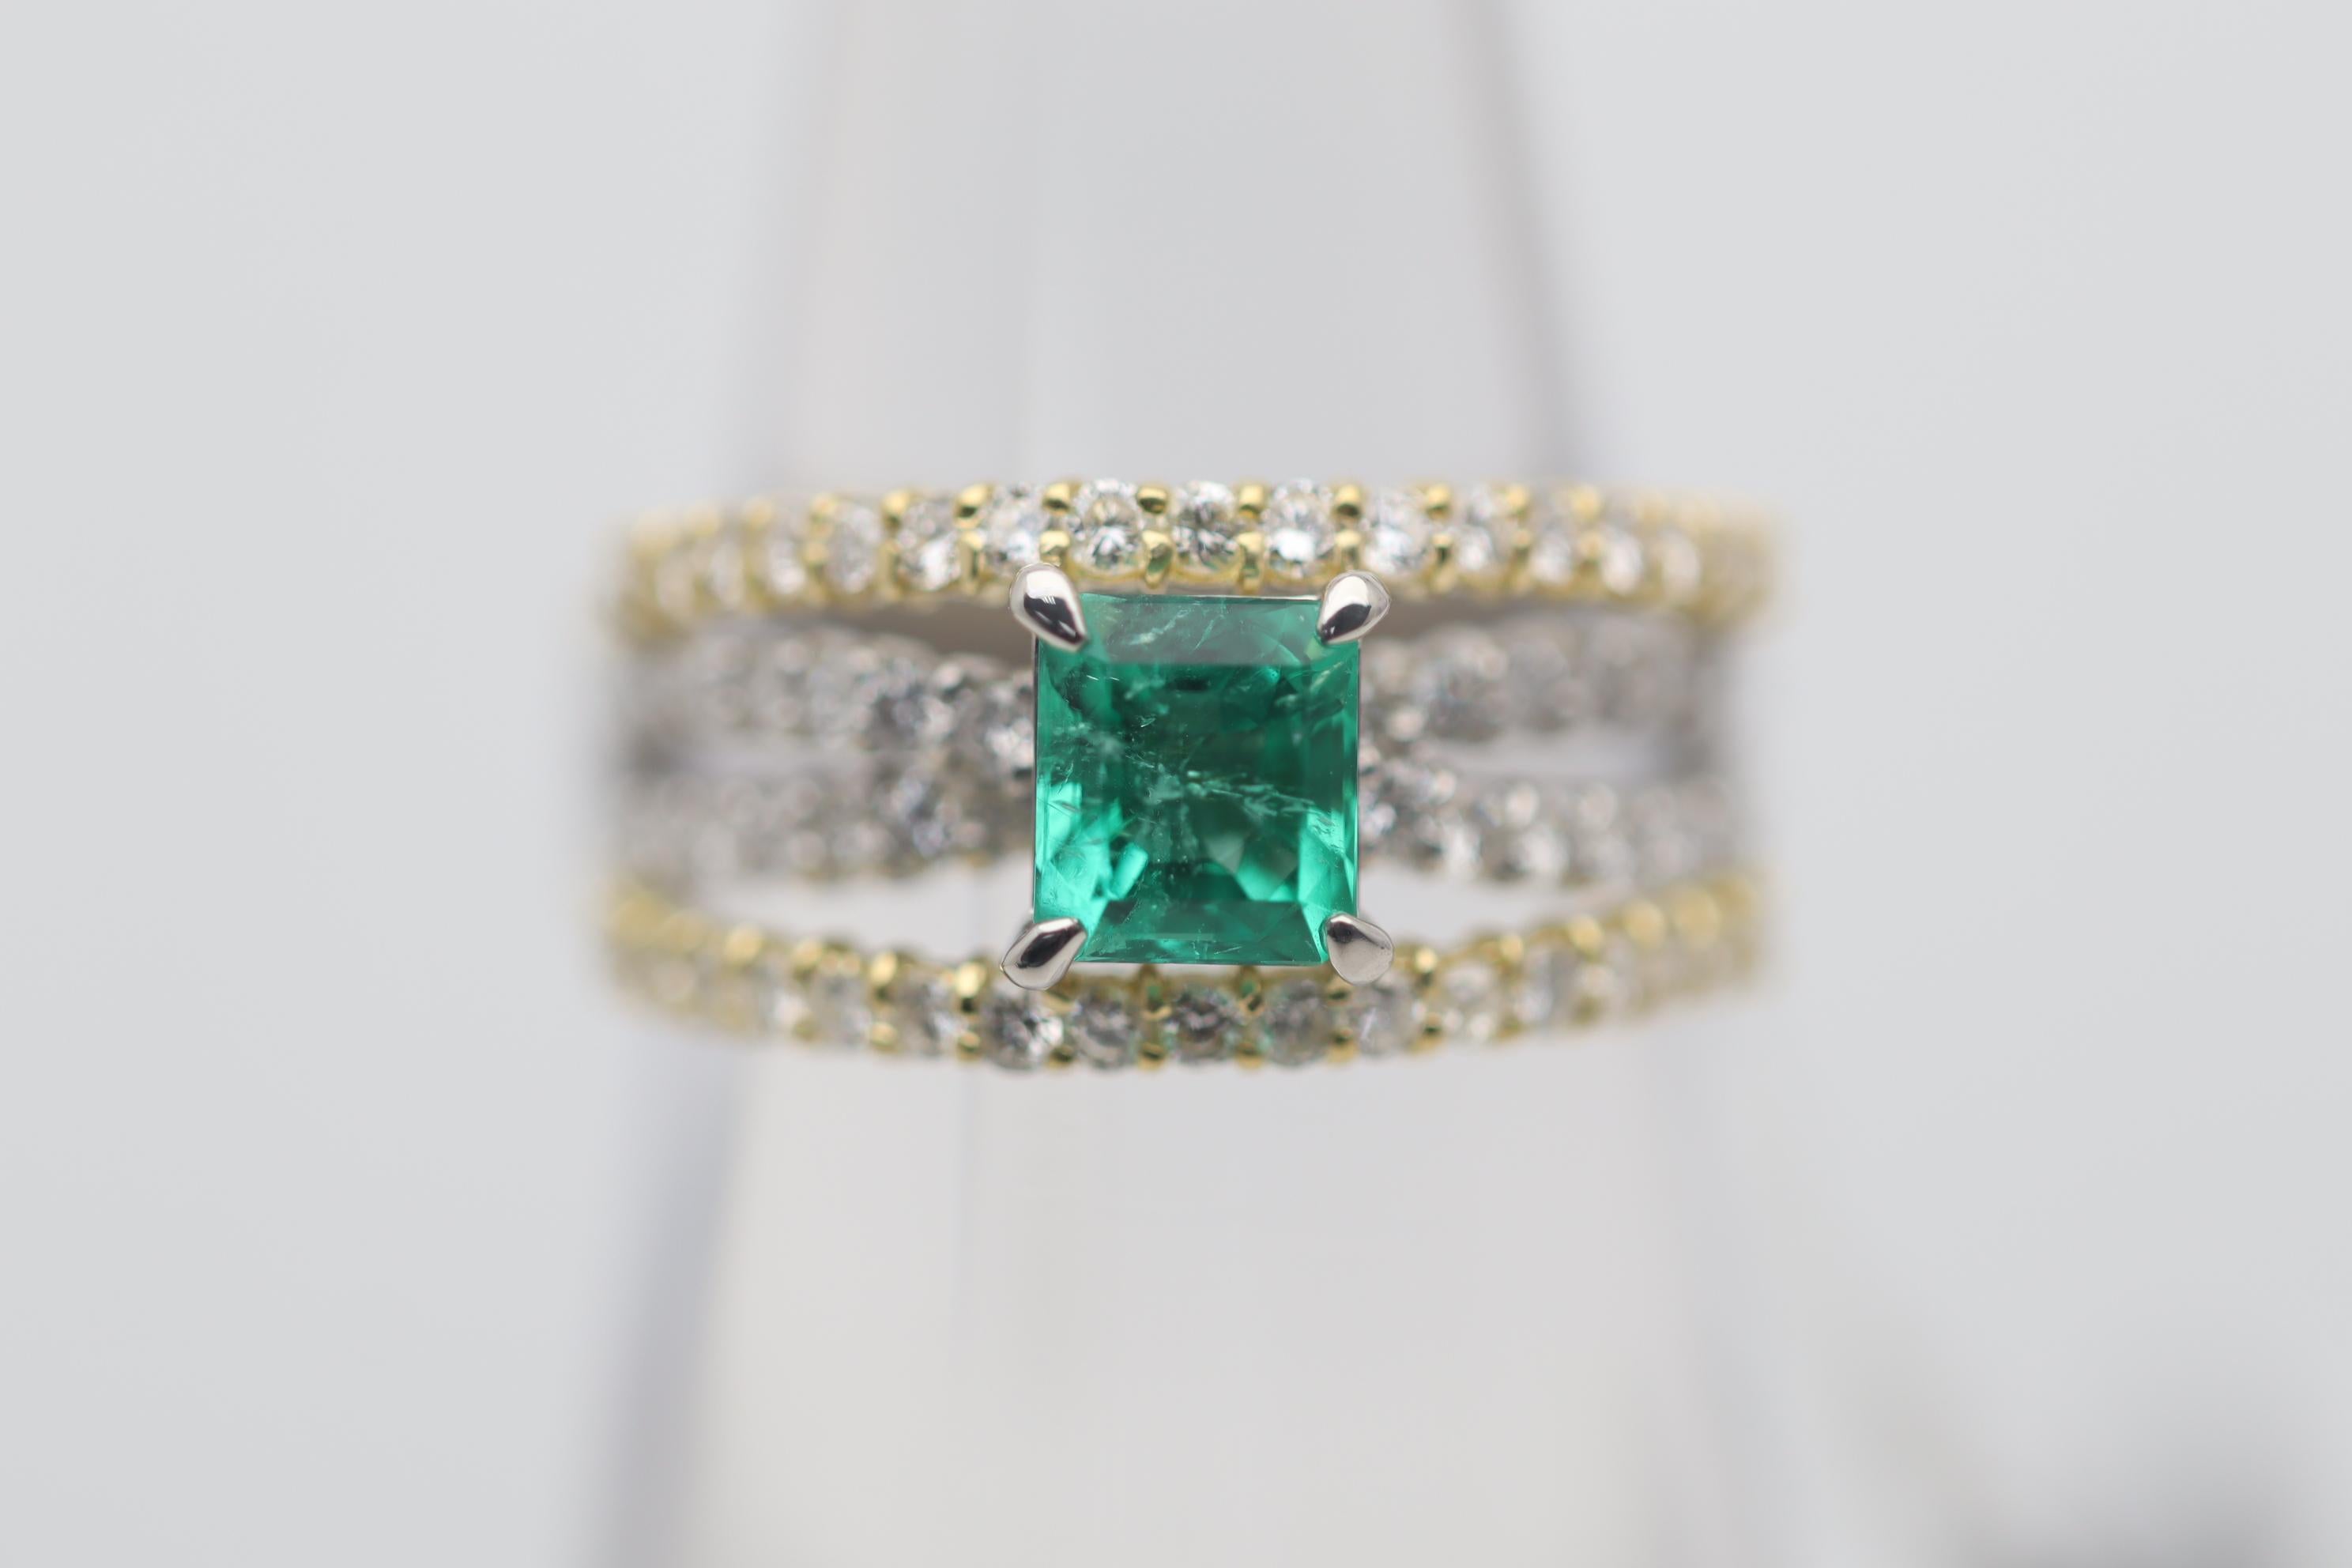 A sleek and stylish ring featuring a fine gem quality emerald weighing 0.77 carats. It has a rich ideal bright grass green color that makes emerald the top green colored gemstone. It is complemented by 0.78 carats of round brilliant-cut diamonds set